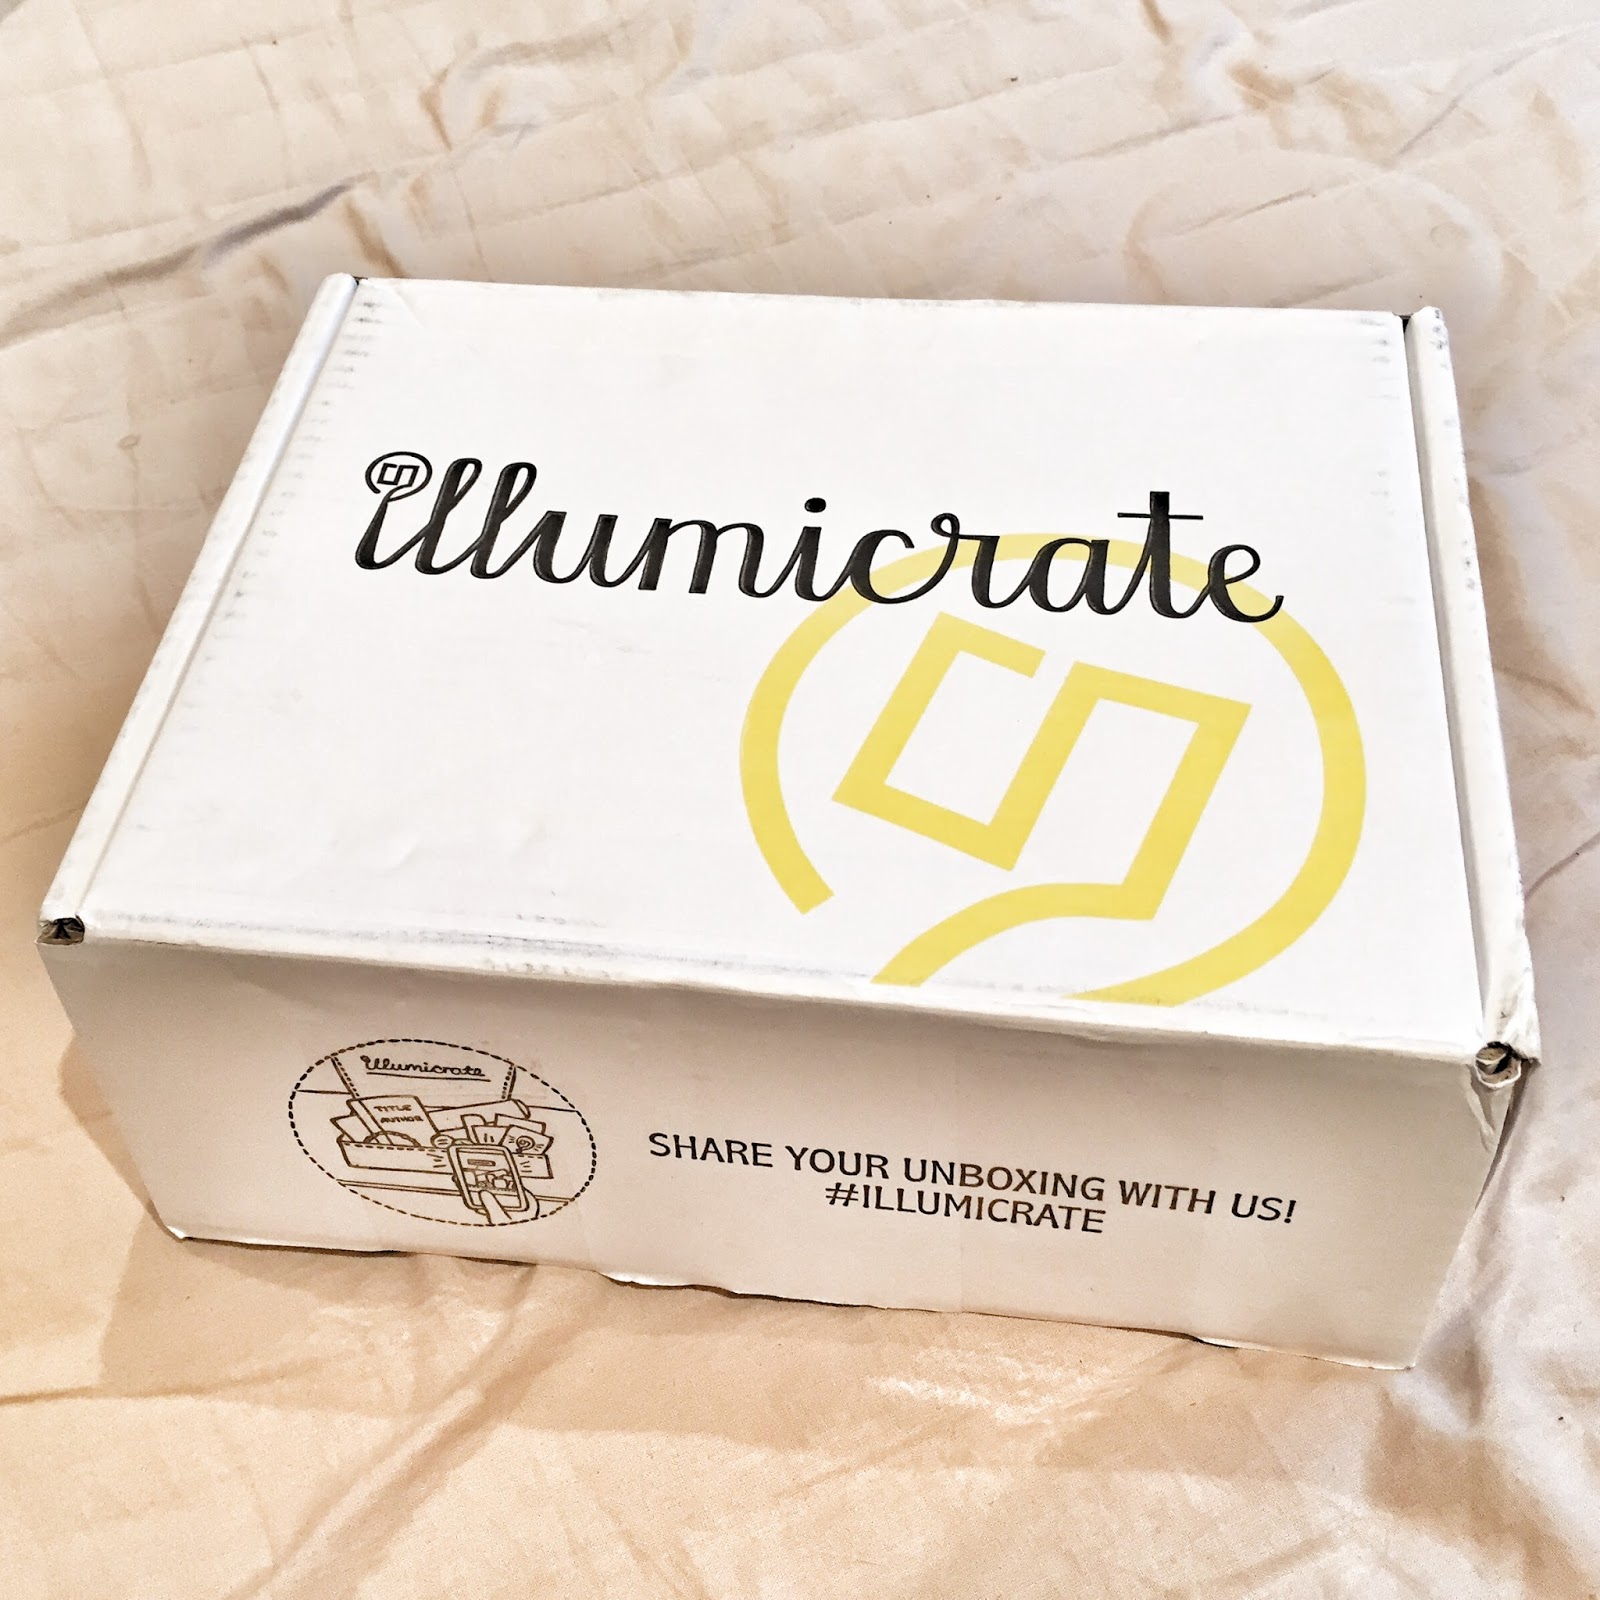 The first Illumicrate has landed!